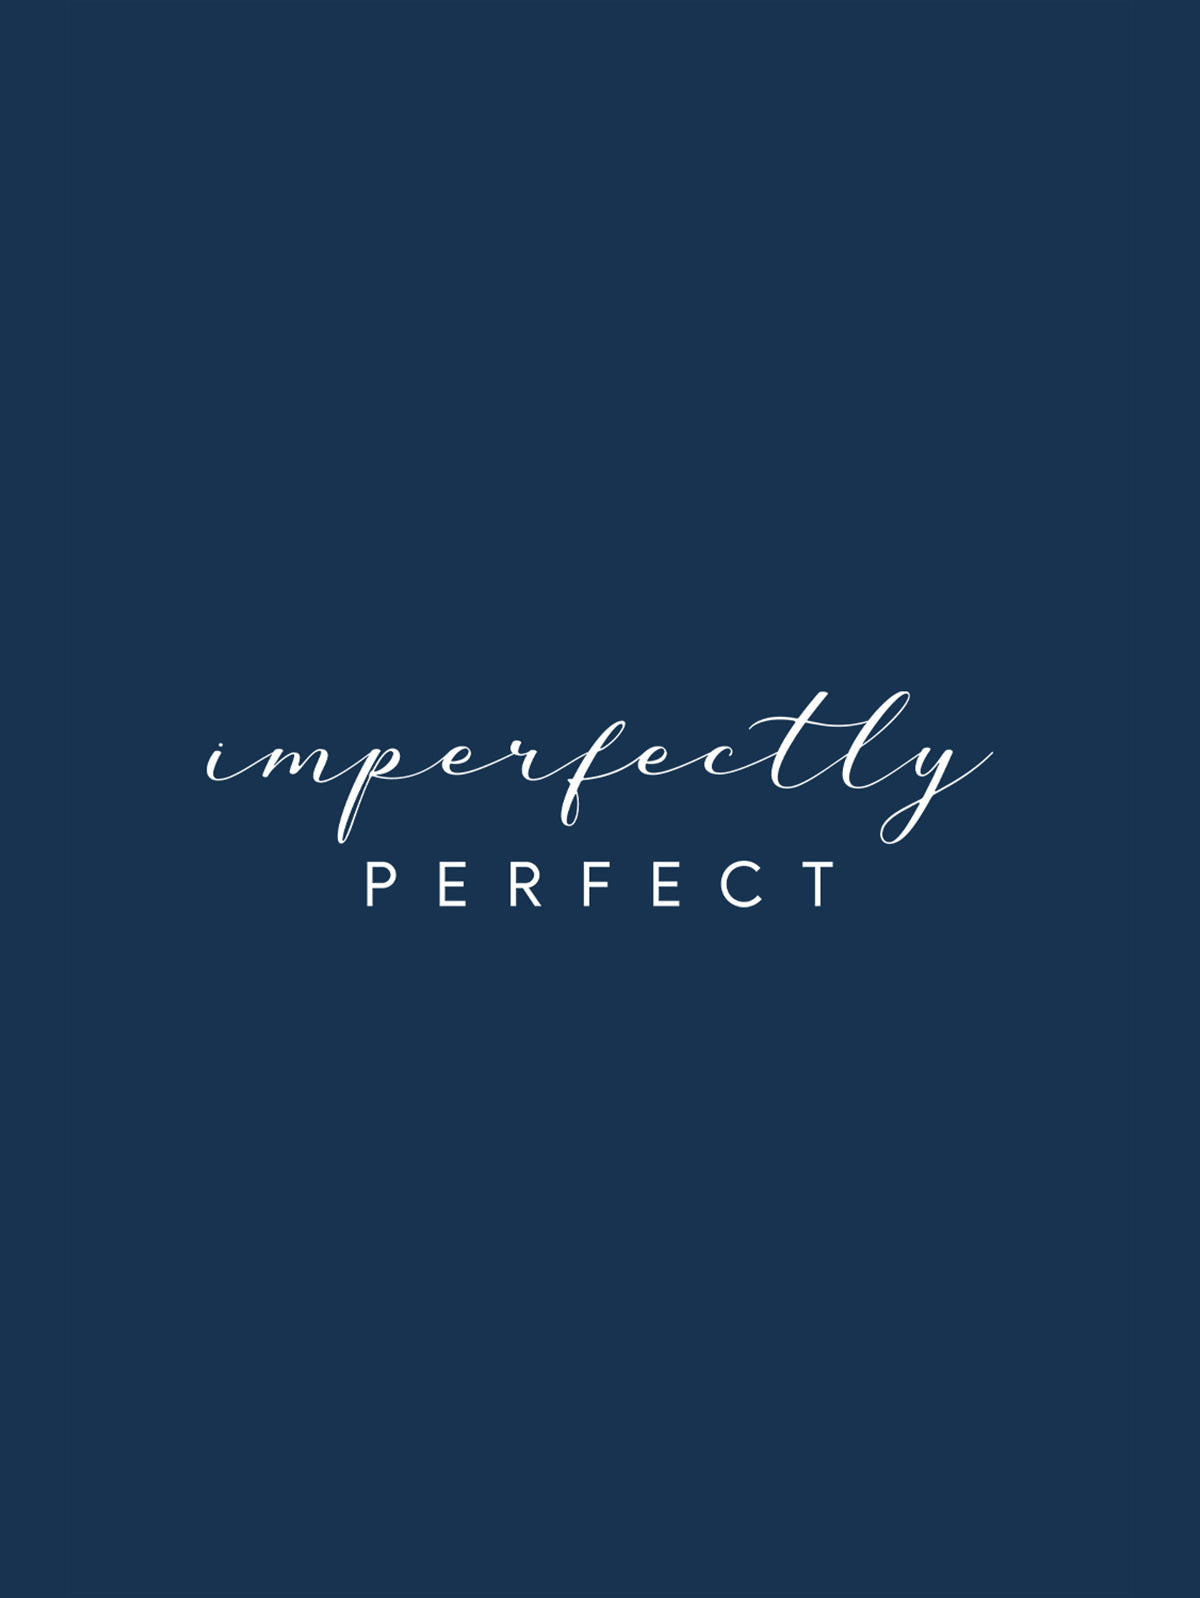 Imperfectly Perfect Plus Size Regular Fit T-Shirt